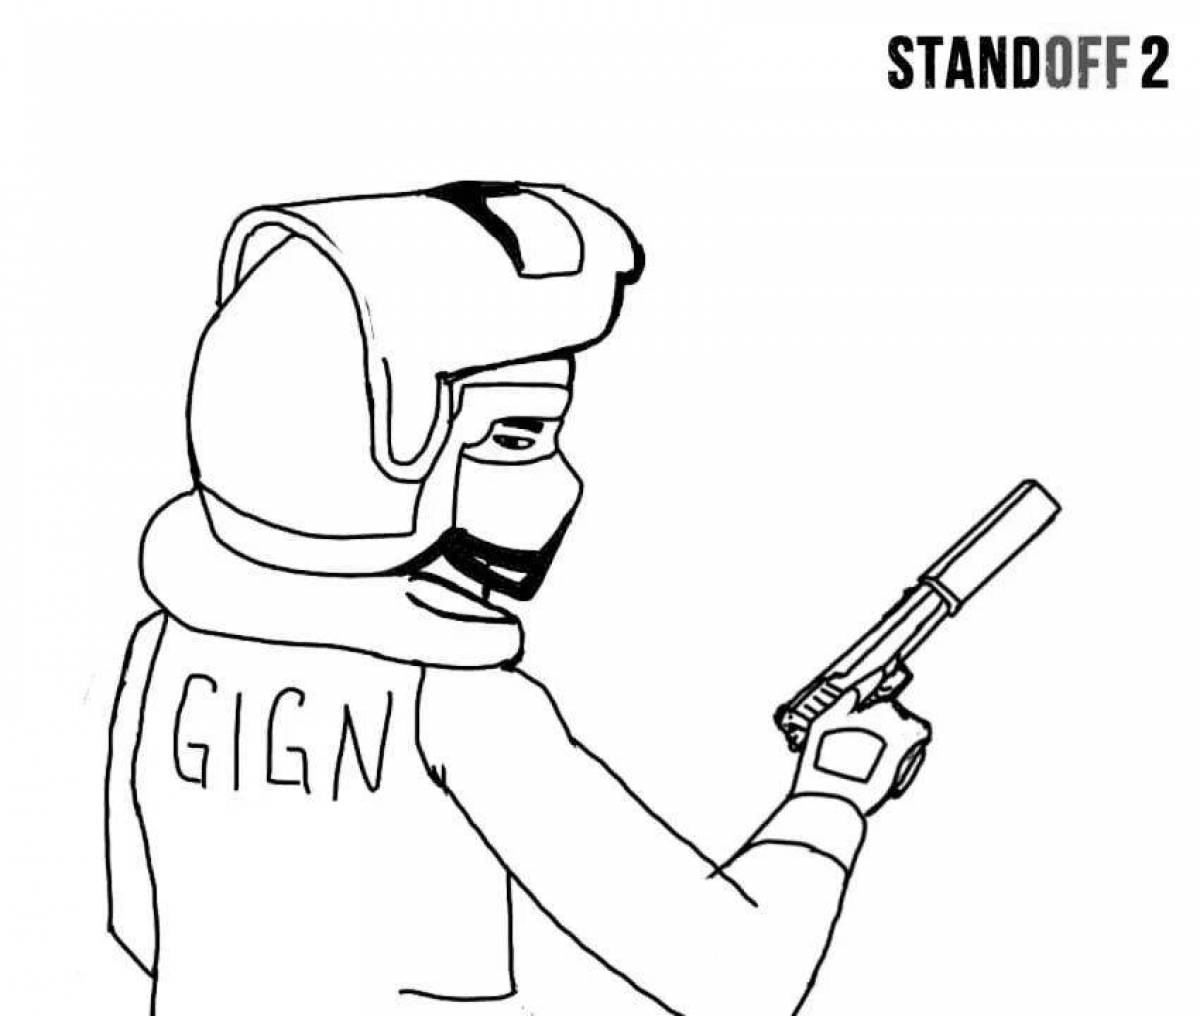 Magical standoff 2 skins coloring page